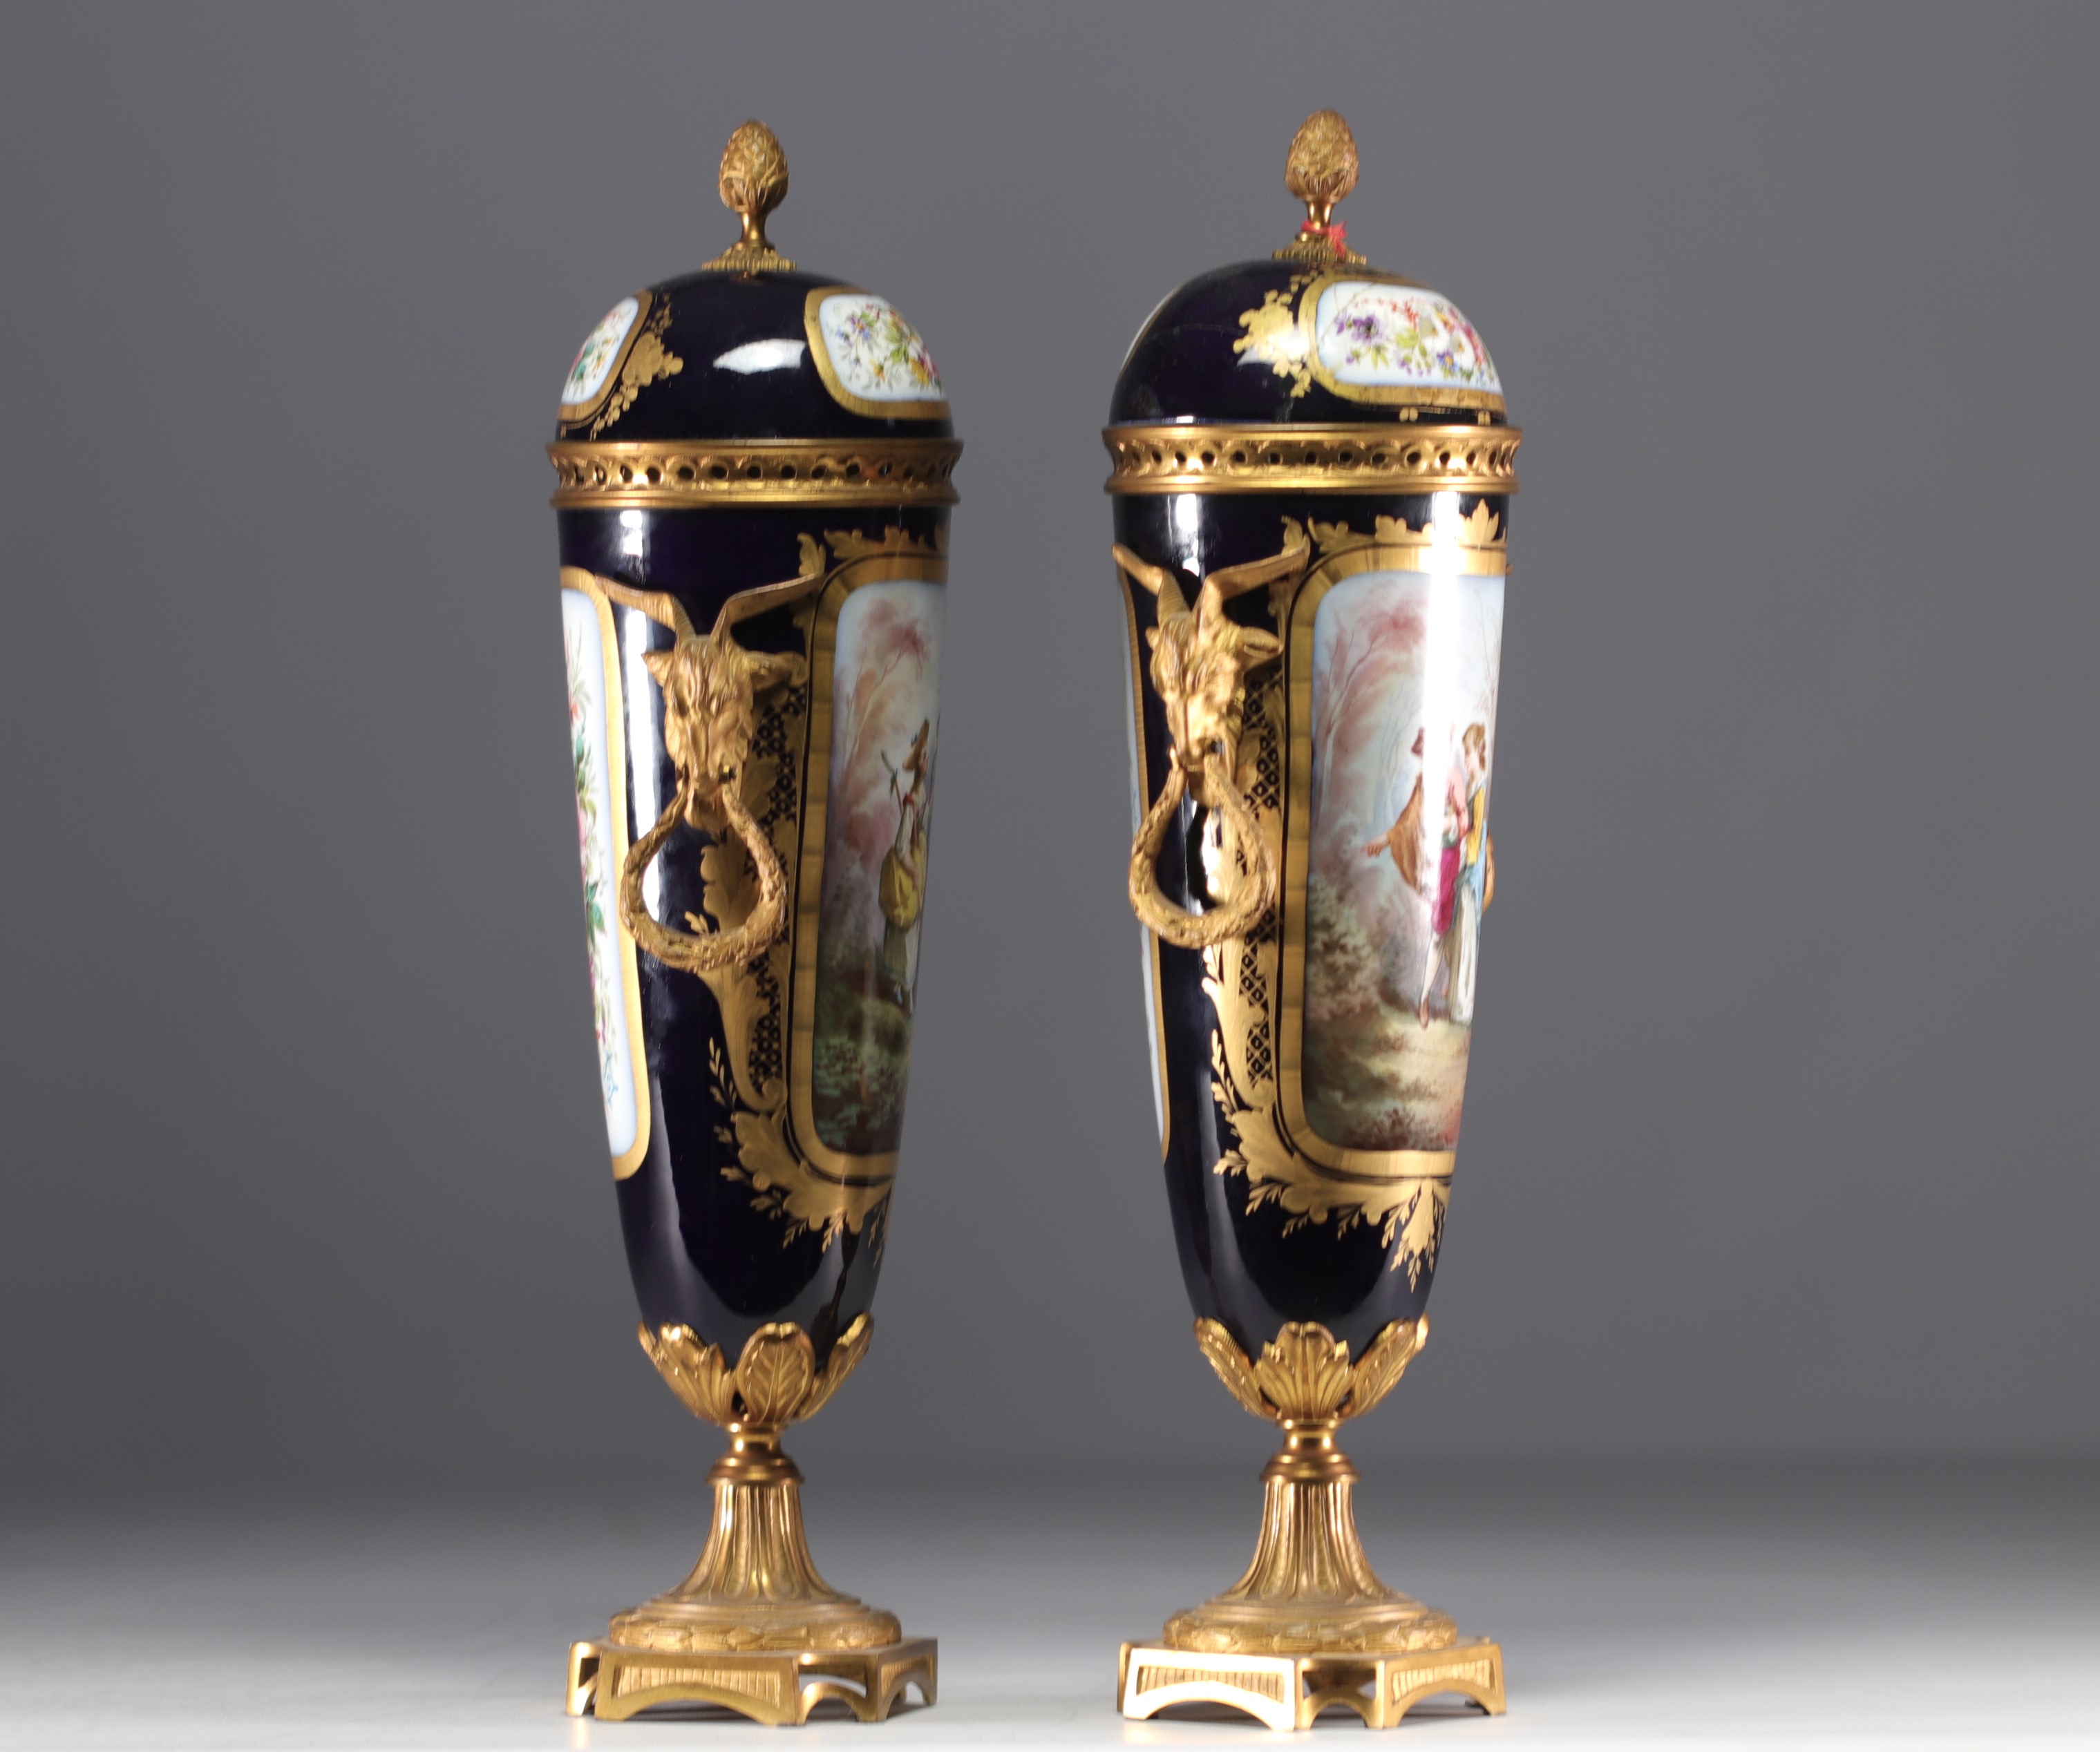 Sevres - Pair of bronze mounted porcelain covered cassolettes "Romantic scenes". - Image 2 of 4